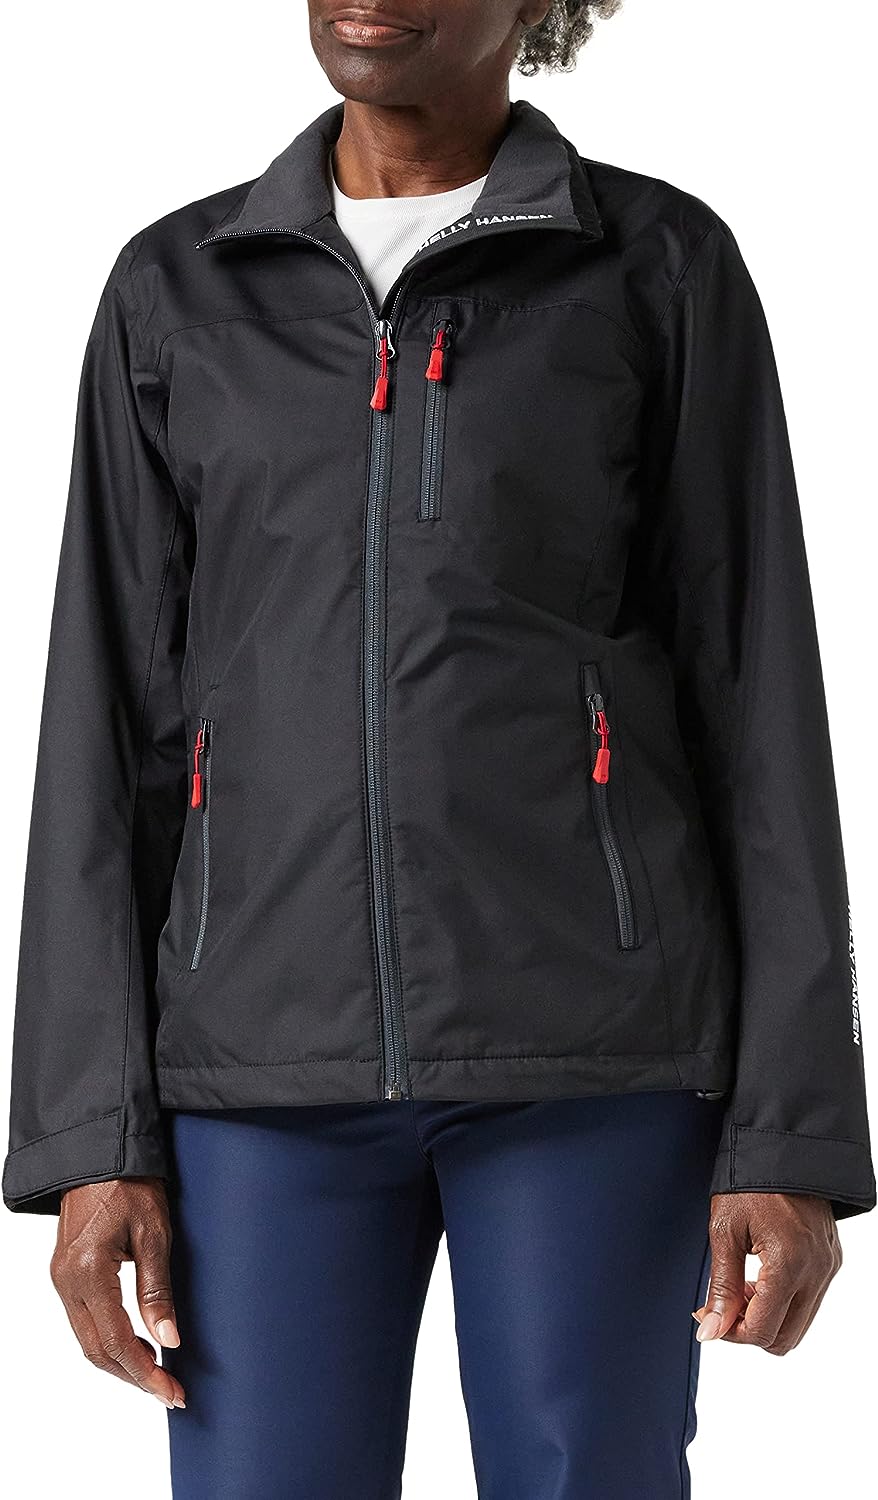 Helly Hansen Women’s Crew Waterproof, Windproof, and Breathable Sailing Jacket, 990 Black, 4X-Large